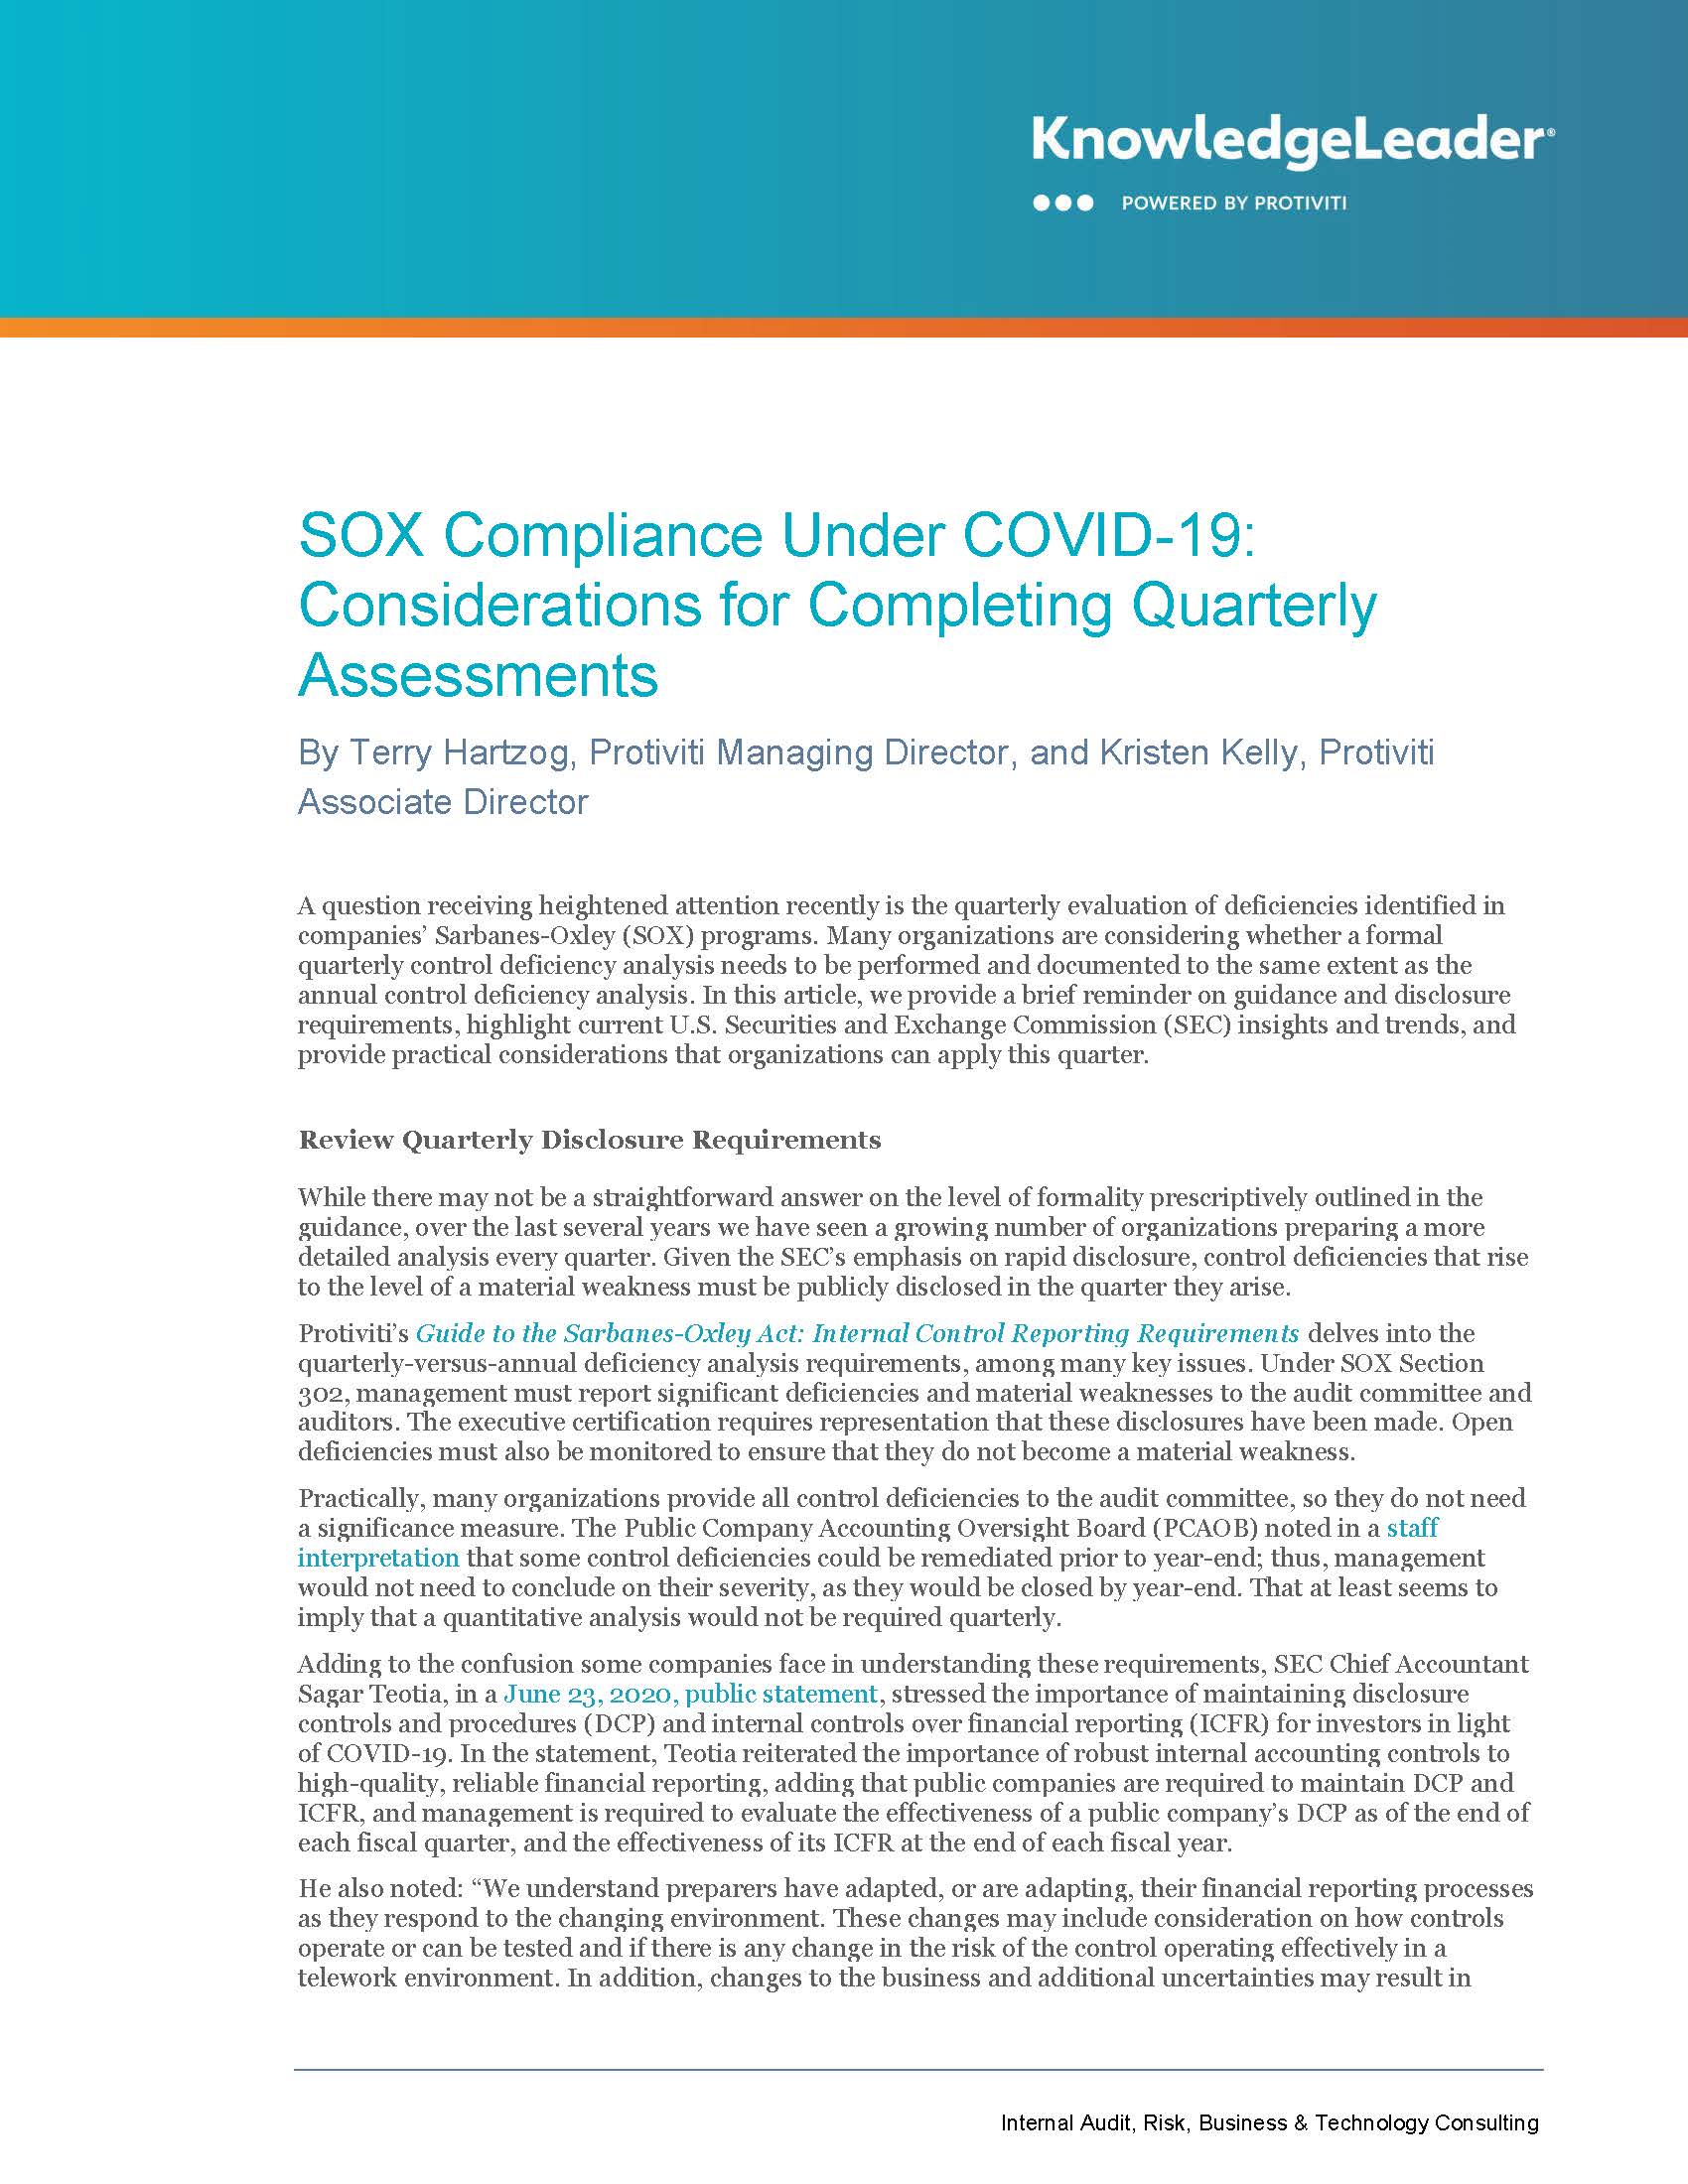 Screenshot of the first page of SOX Compliance Under COVID-19 Considerations for Completing Quarterly Assessments